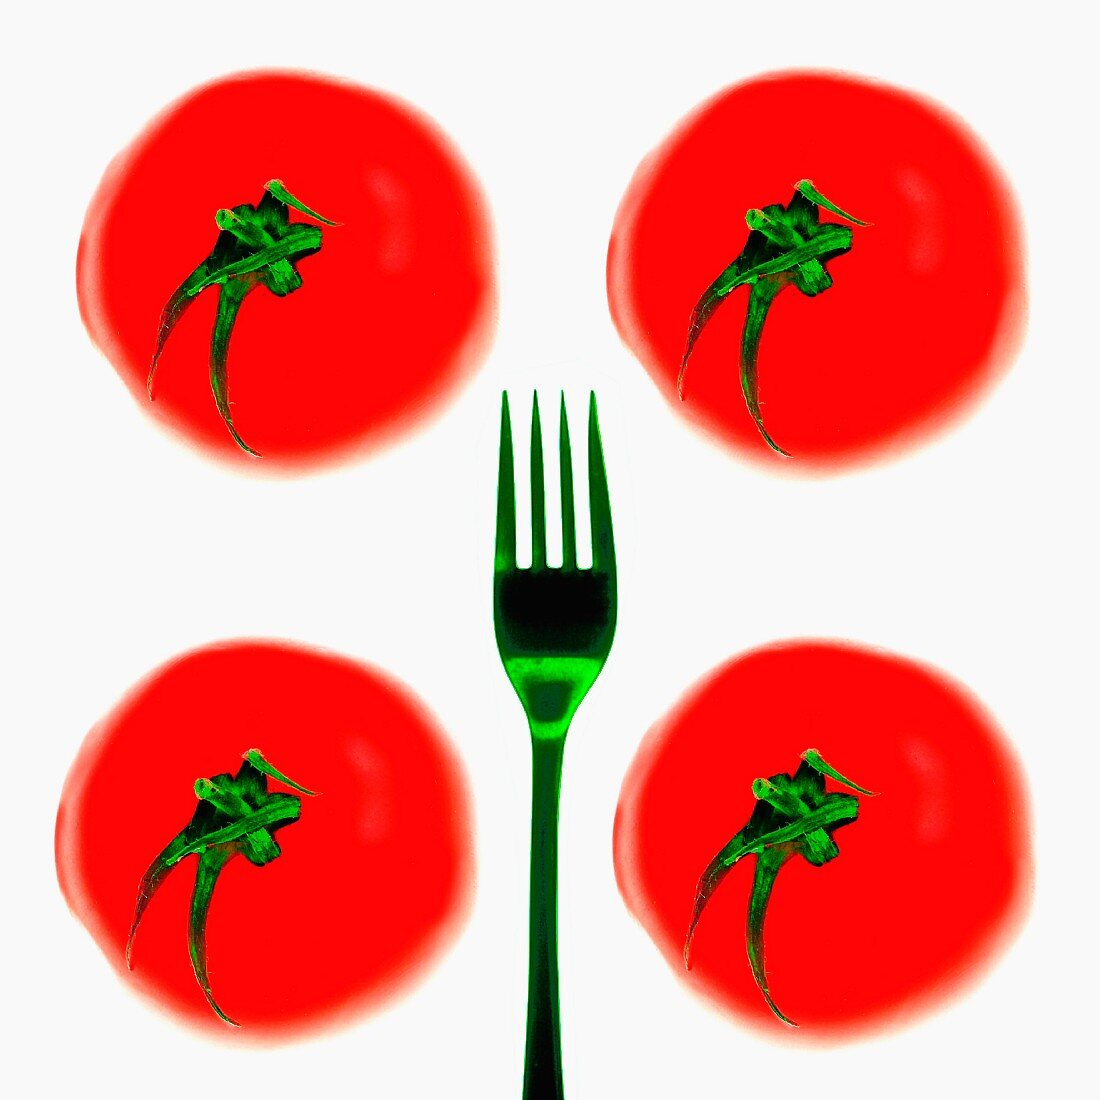 Four tomatoes and a green fork